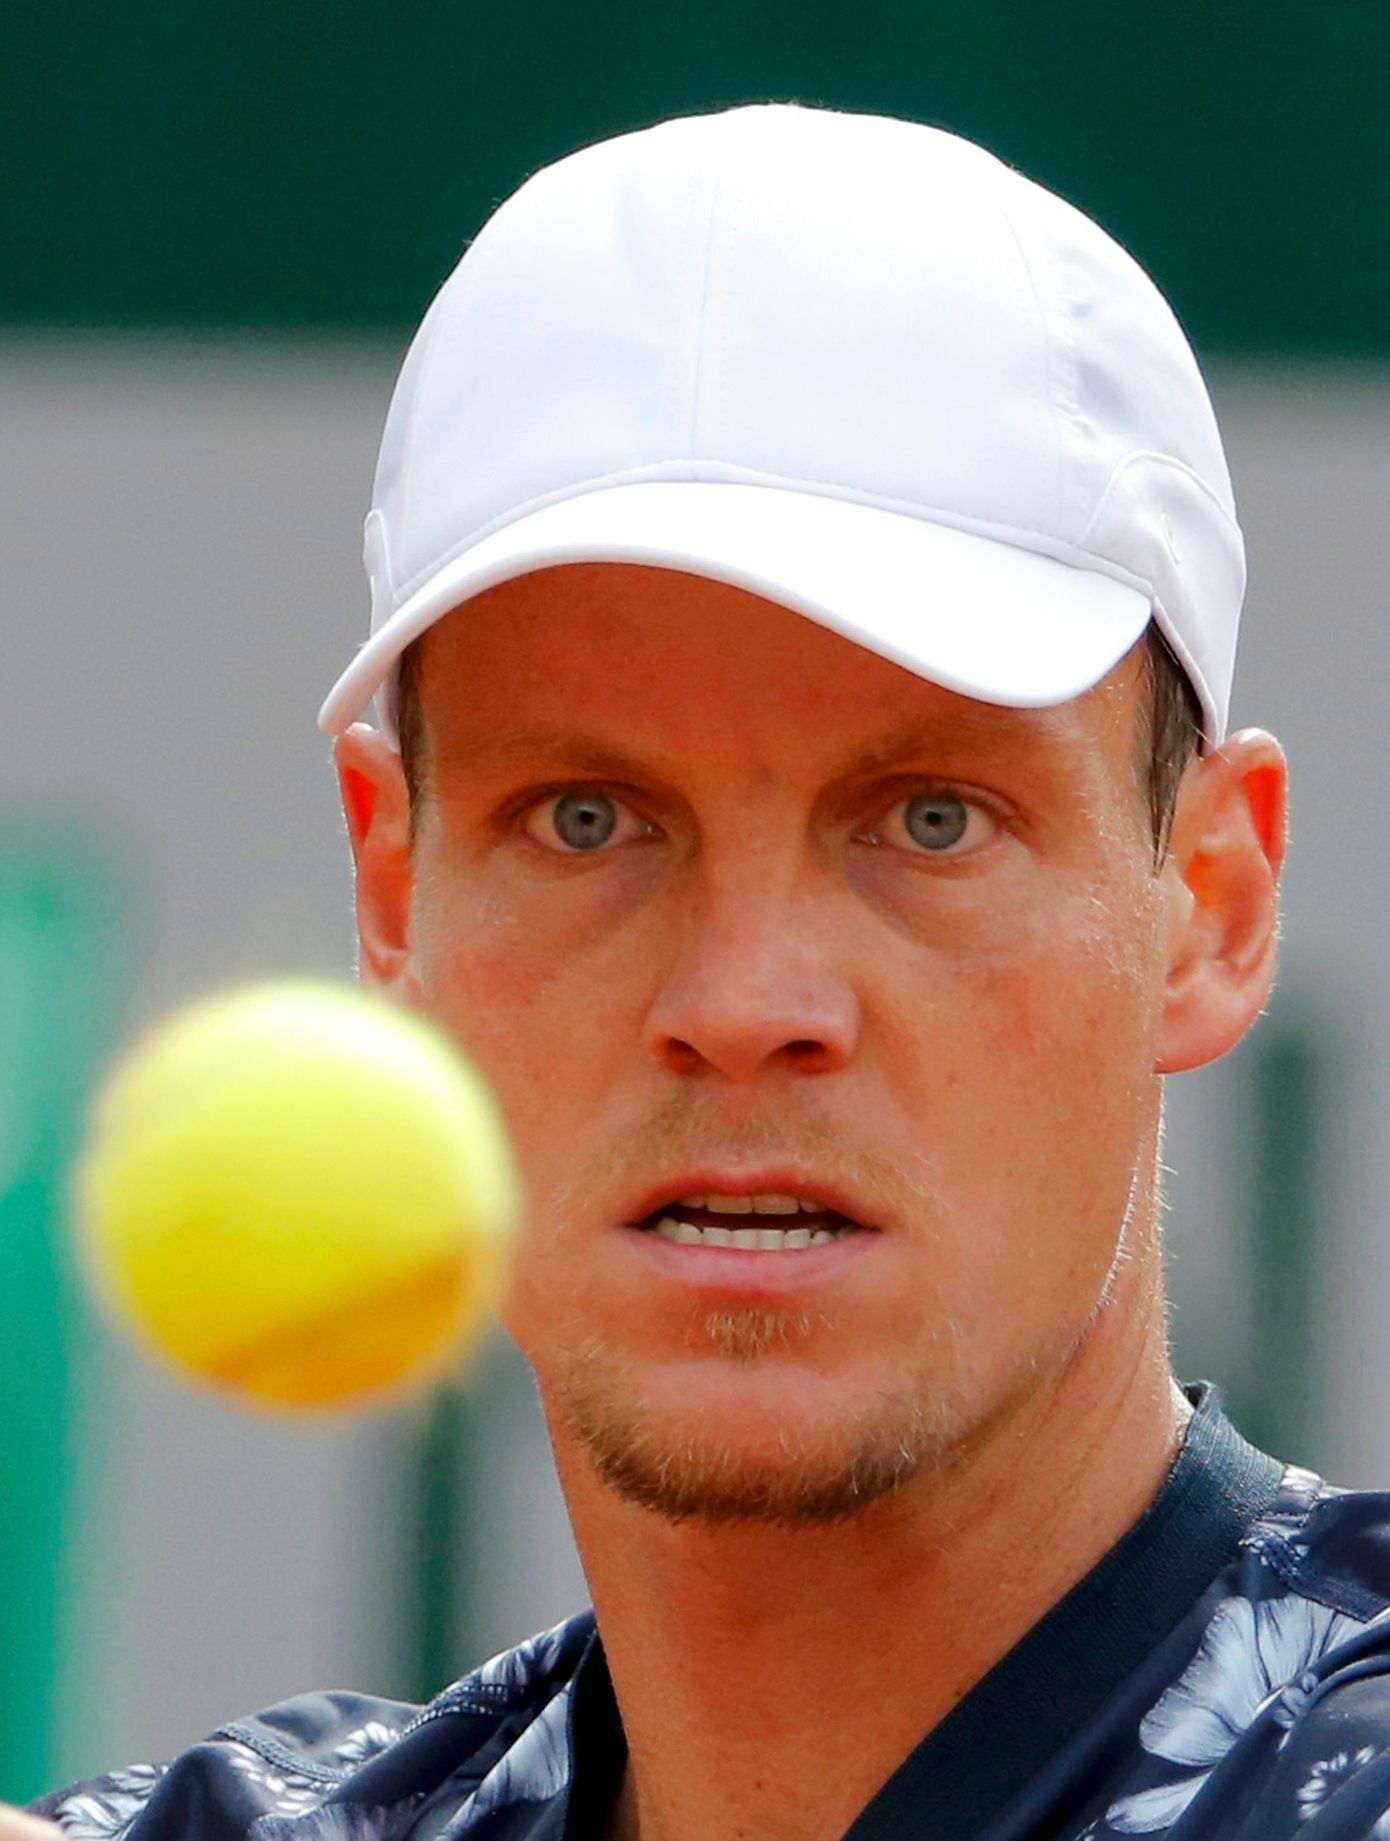 Tomas Berdych of the Czech Republic eyes the ball during his men's quarter final match against Ernests Gulbis of Latvia at the French Open Tennis tournament at the Roland Garros stadium in Paris